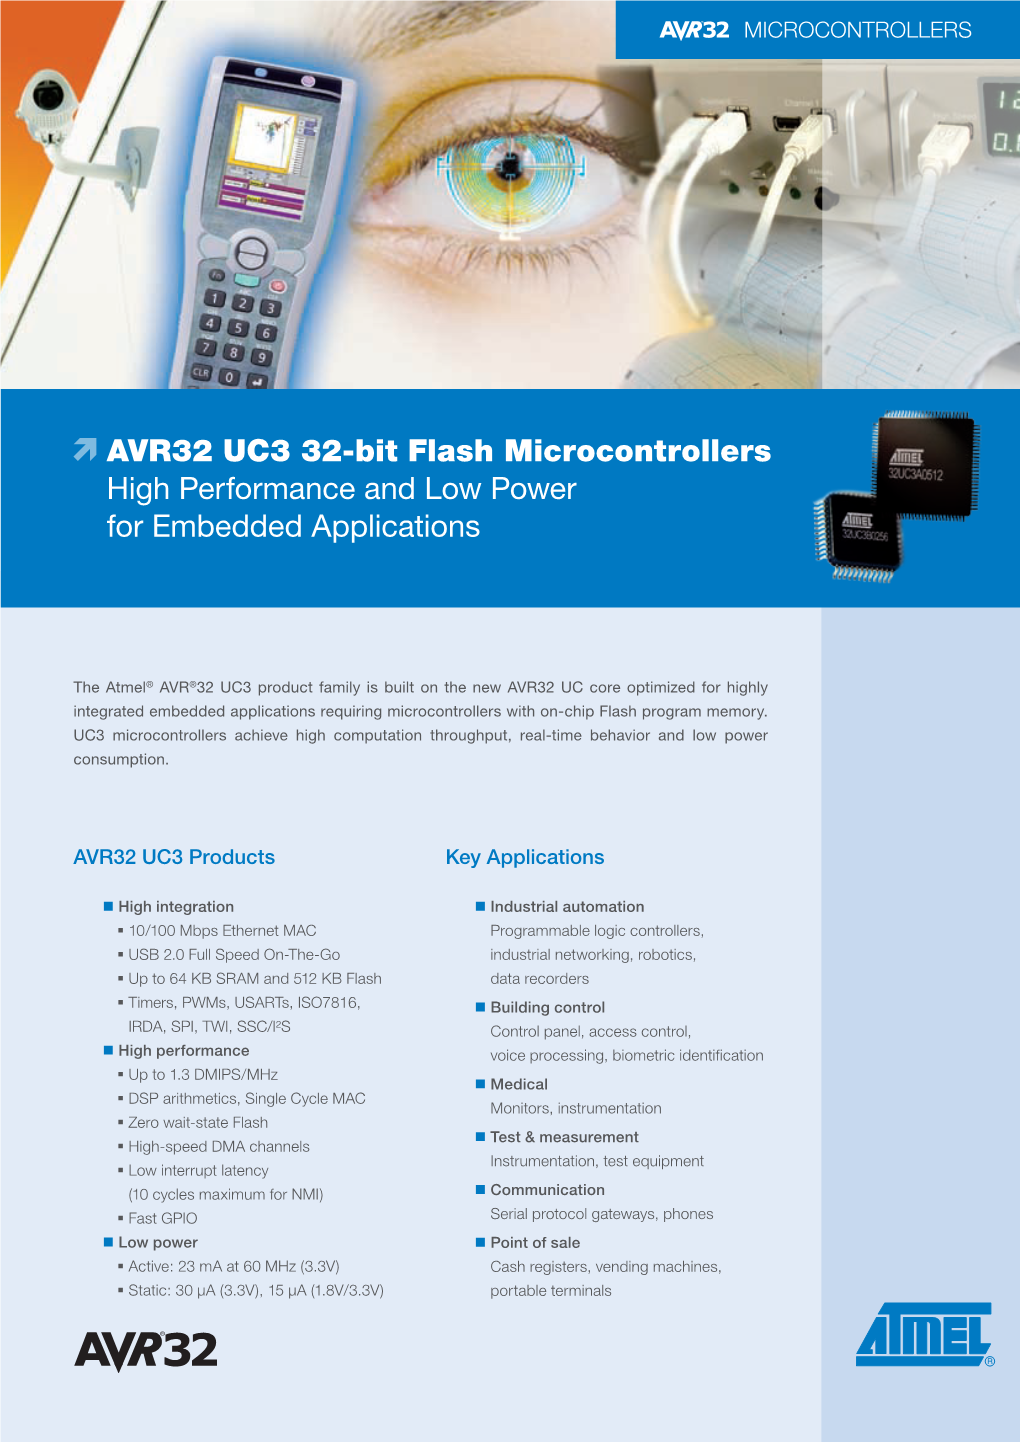 AVR32 UC3 32-Bit Flash Microcontrollers High Performance and Low Power for Embedded Applications